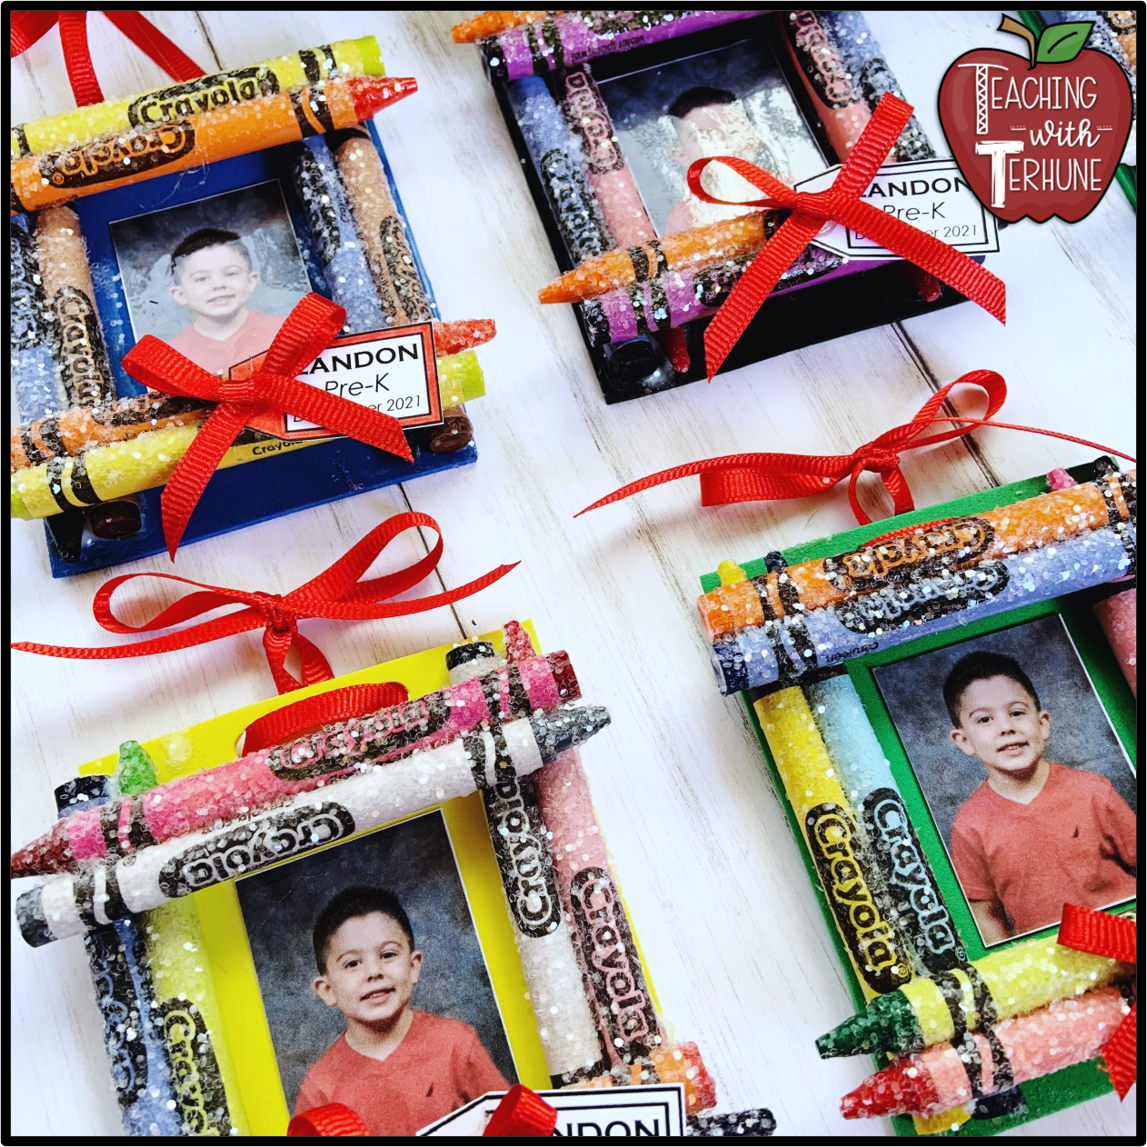 Souvenir Suitcase, Crayola CIY, DIY Crafts for Kids and Adults